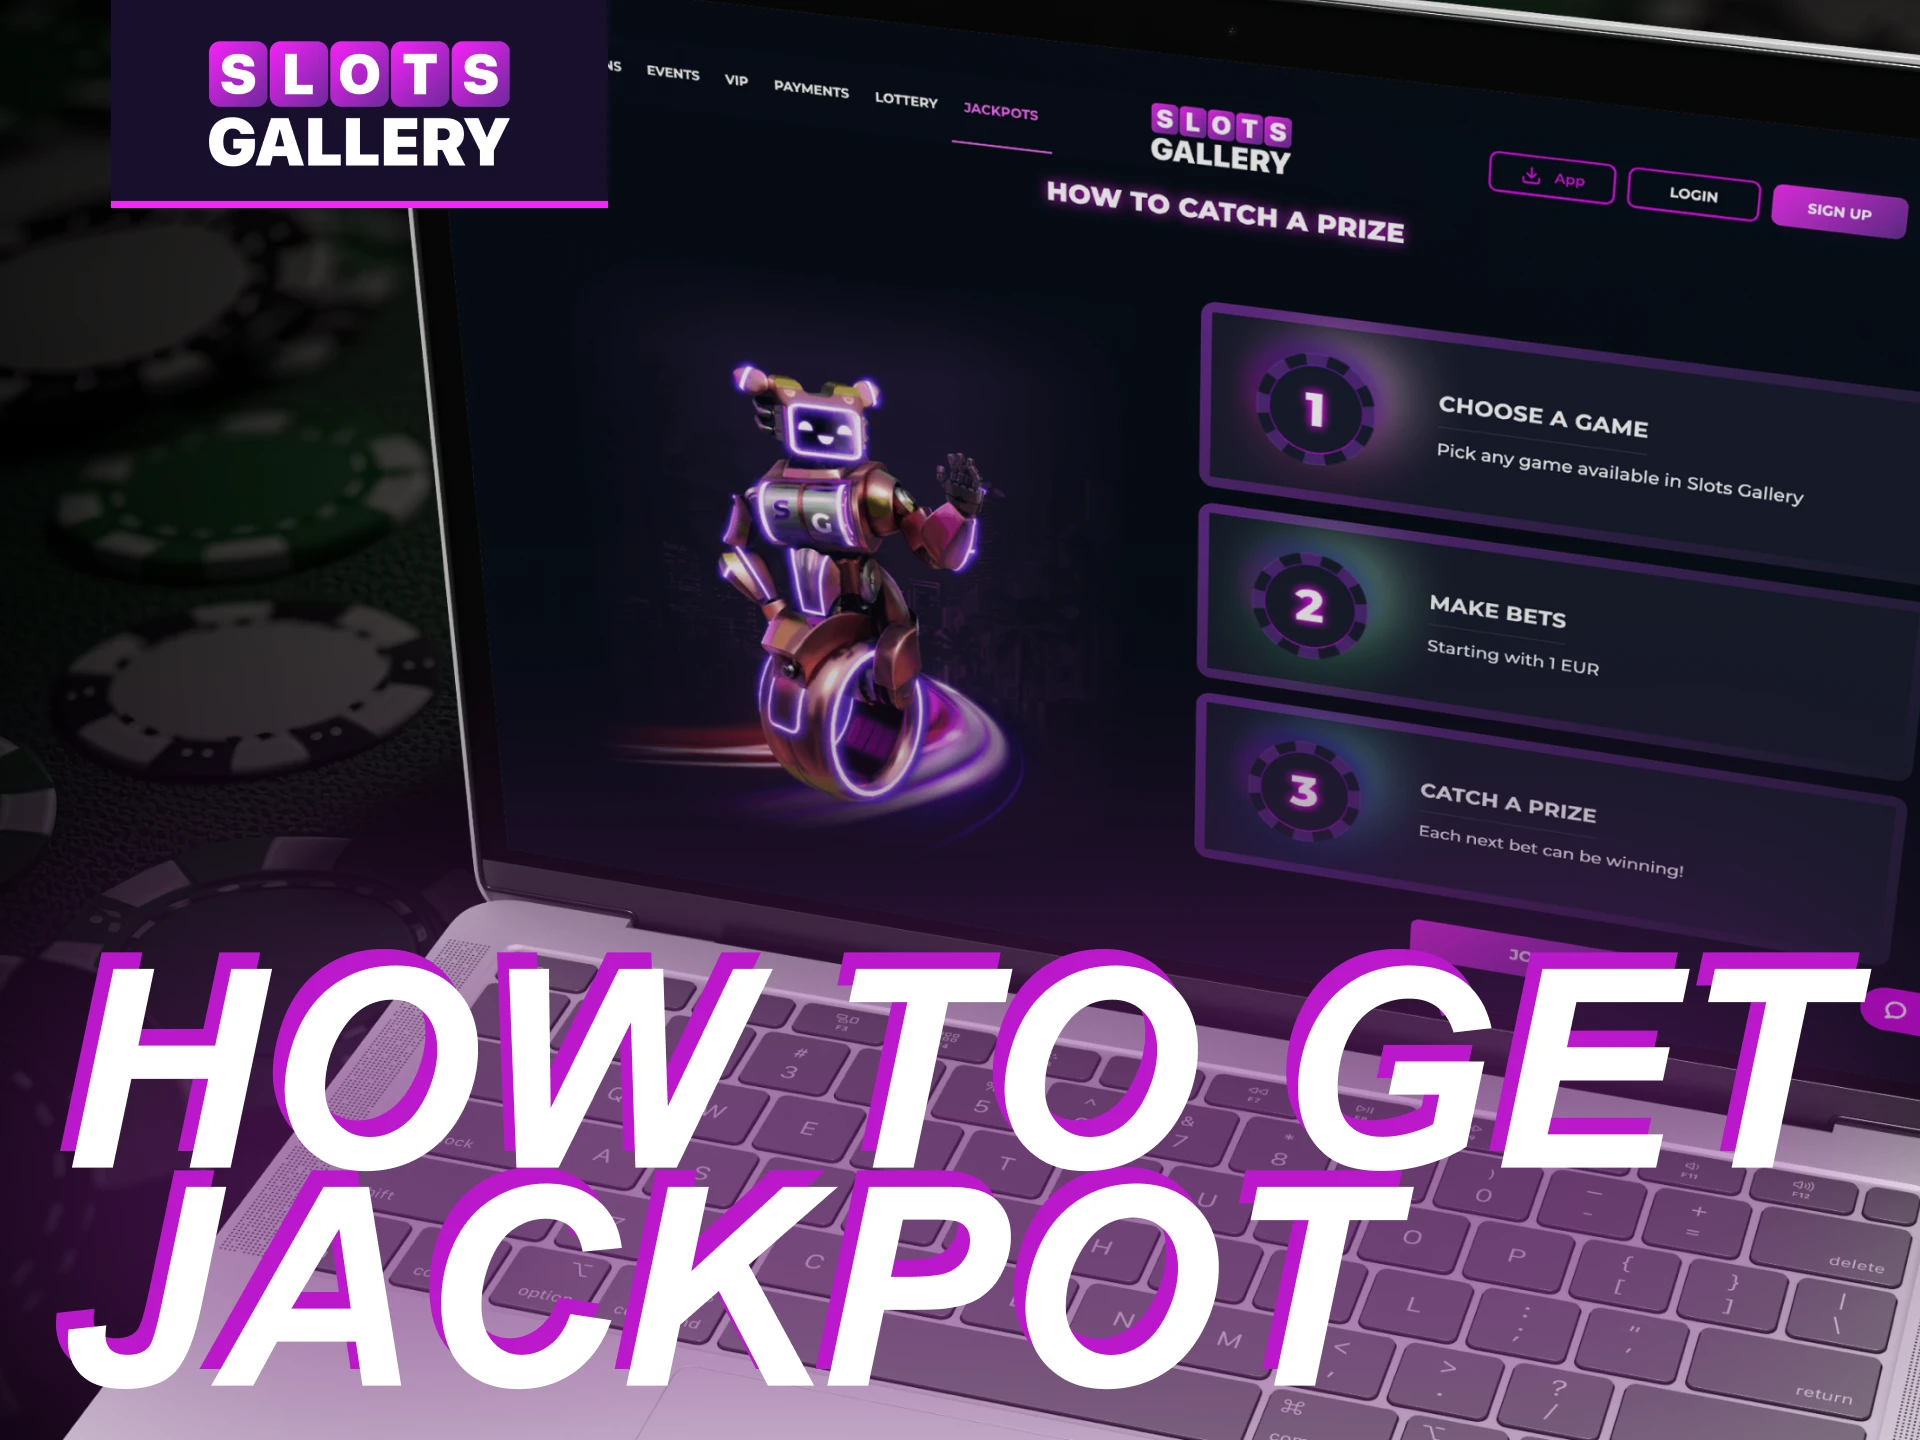 What do I need to do to get the jackpot at the Slots Gallery online casino.